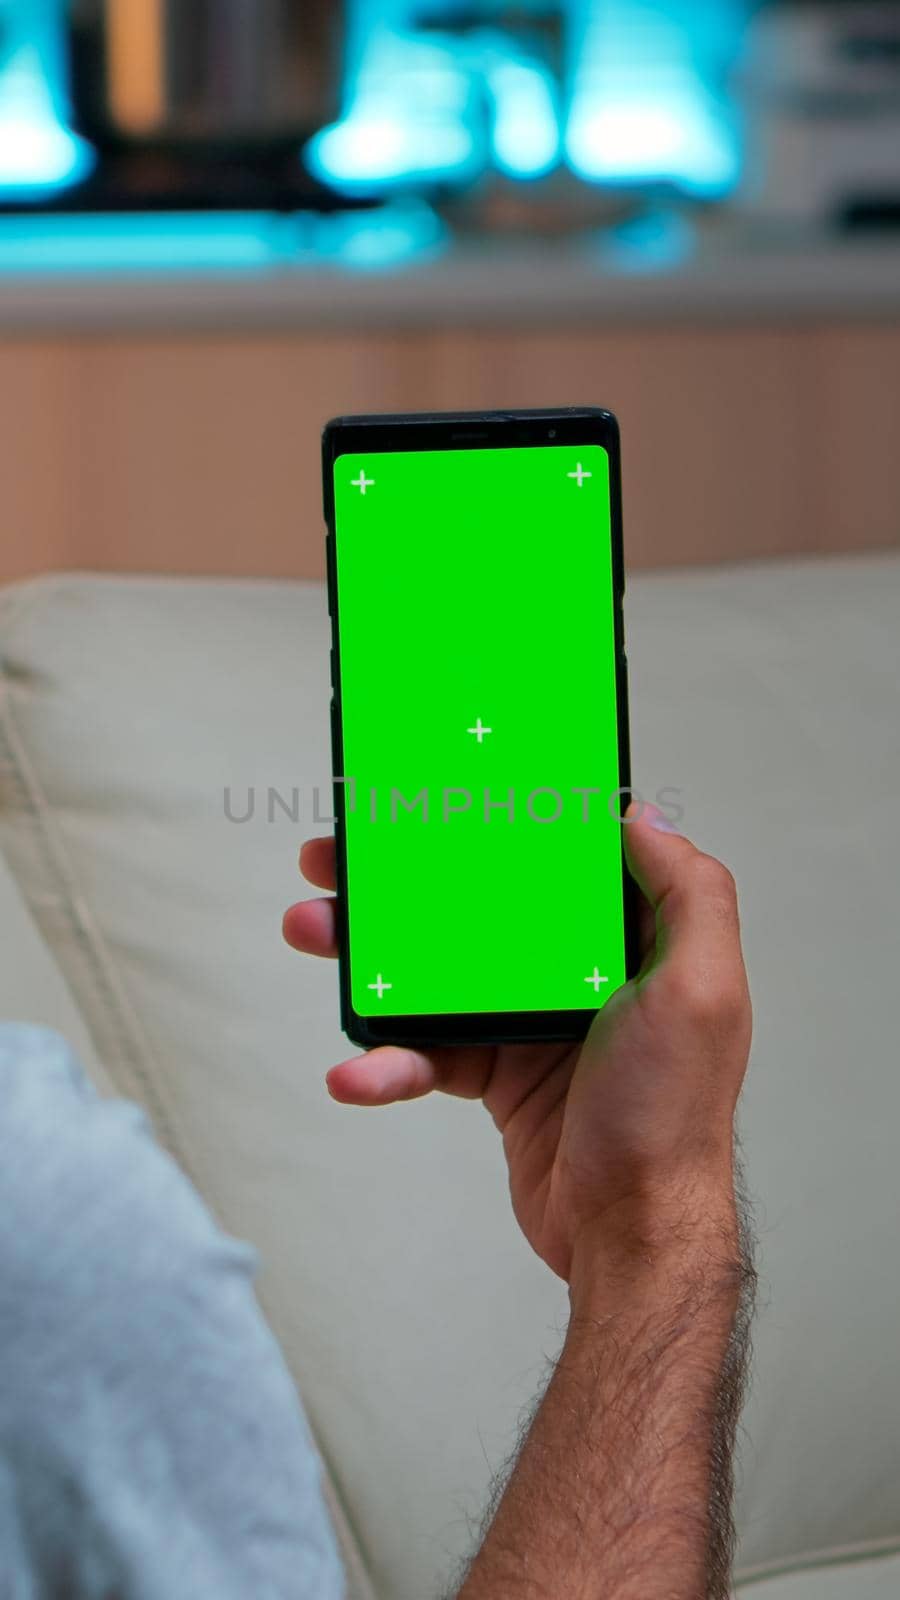 Relaxed man looking at smartphone with mock up green screen chroma key display while relaxing on sofa. Caucasian male holding in horizontal mode phone with isolated display late at night in kitchen